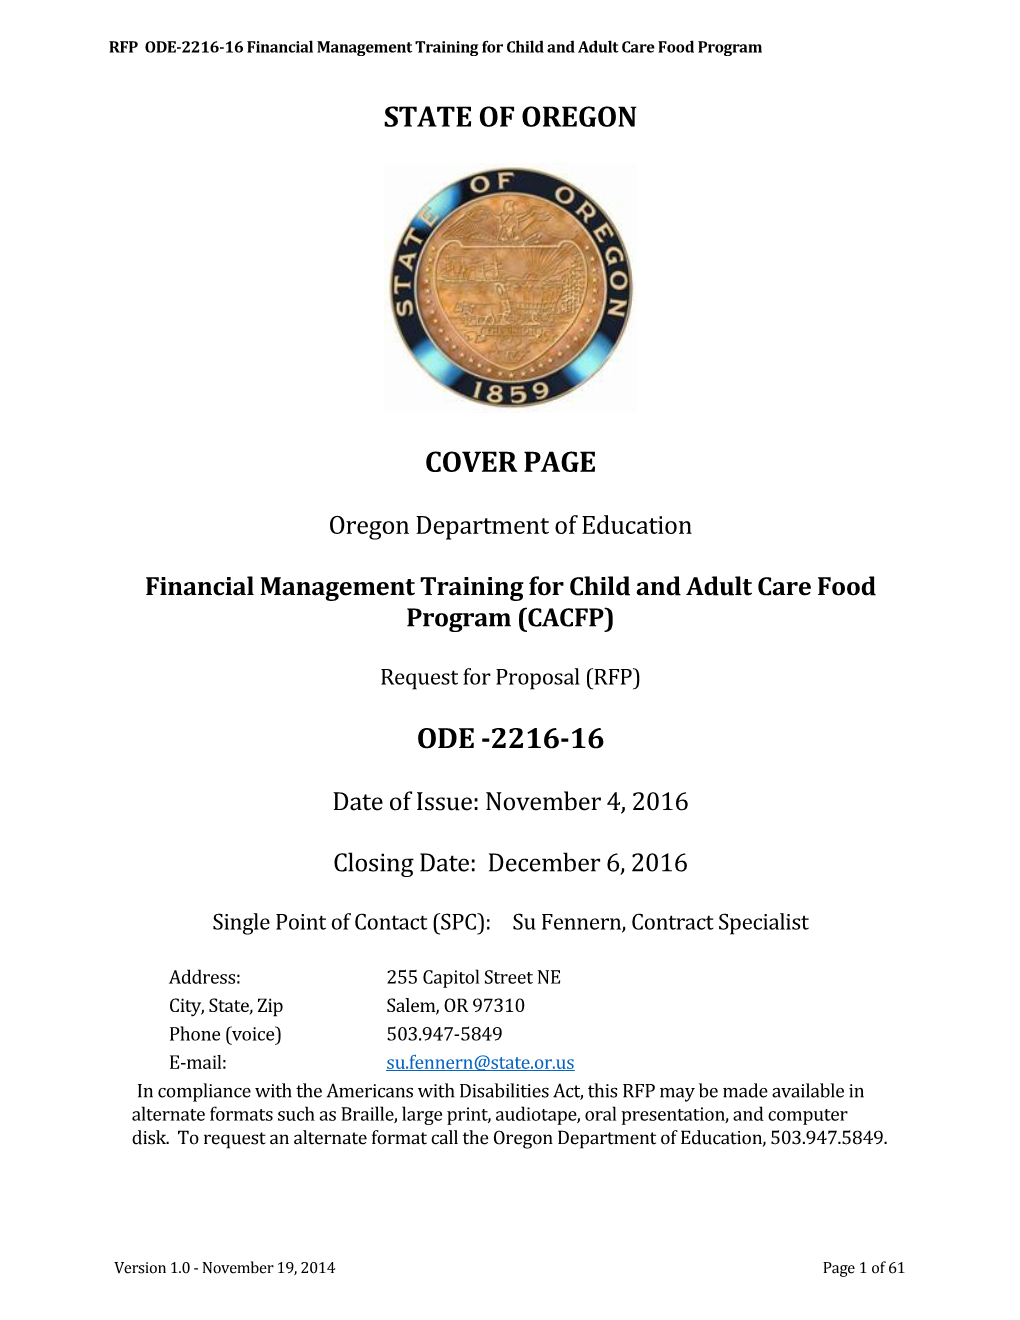 RFP ODE-2216-16 Financial Management Training for Child and Adult Care Food Program